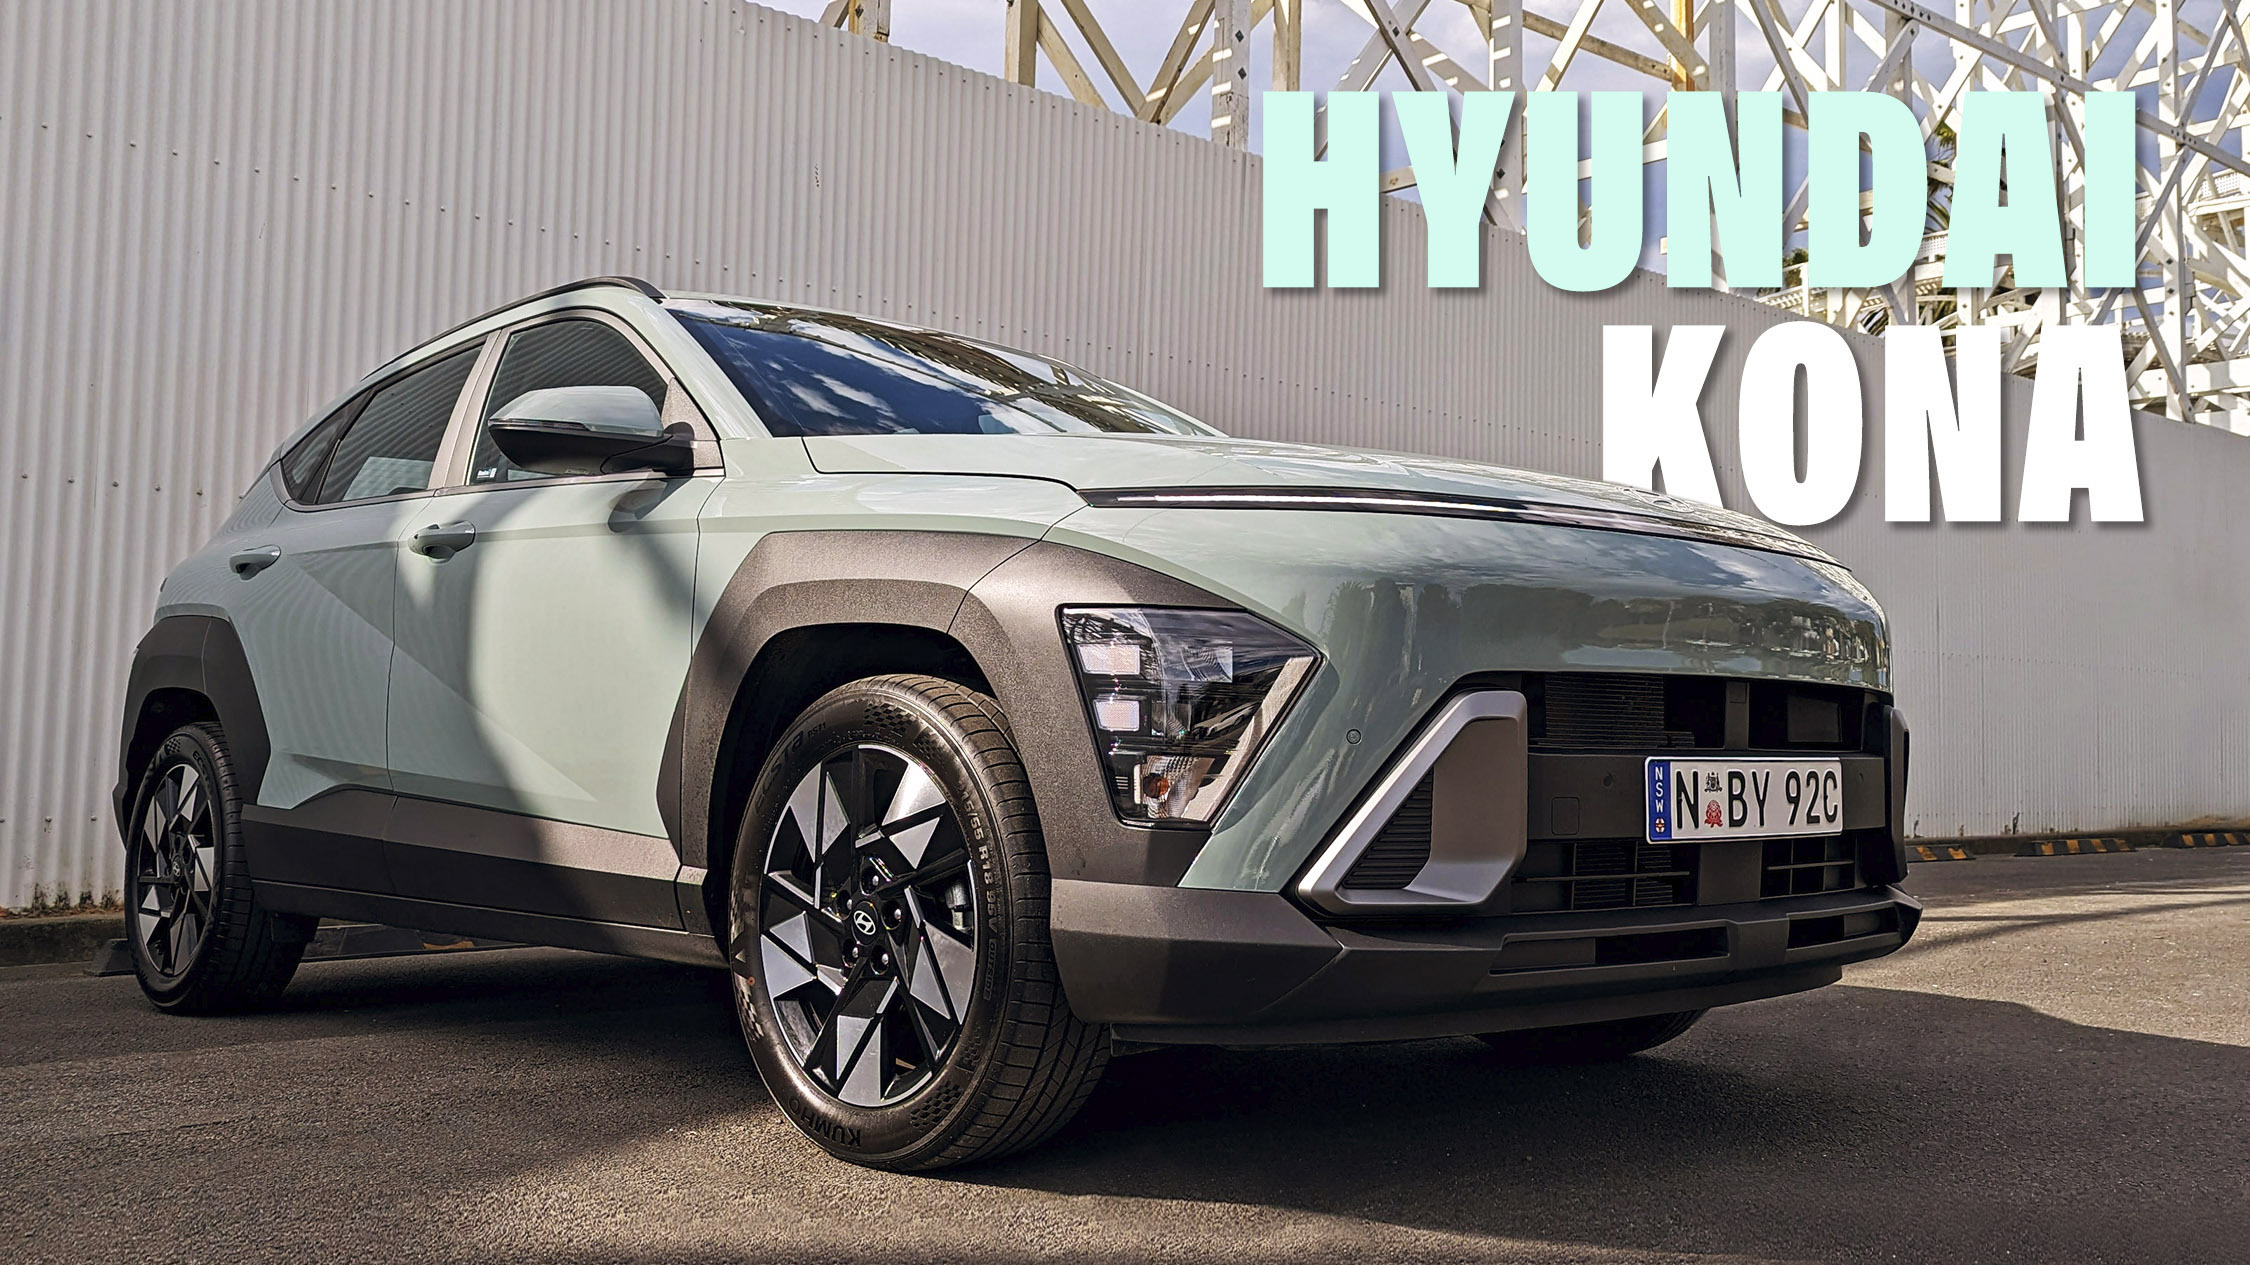 The 2023 Hyundai Kona: Electric compact SUV at its finest